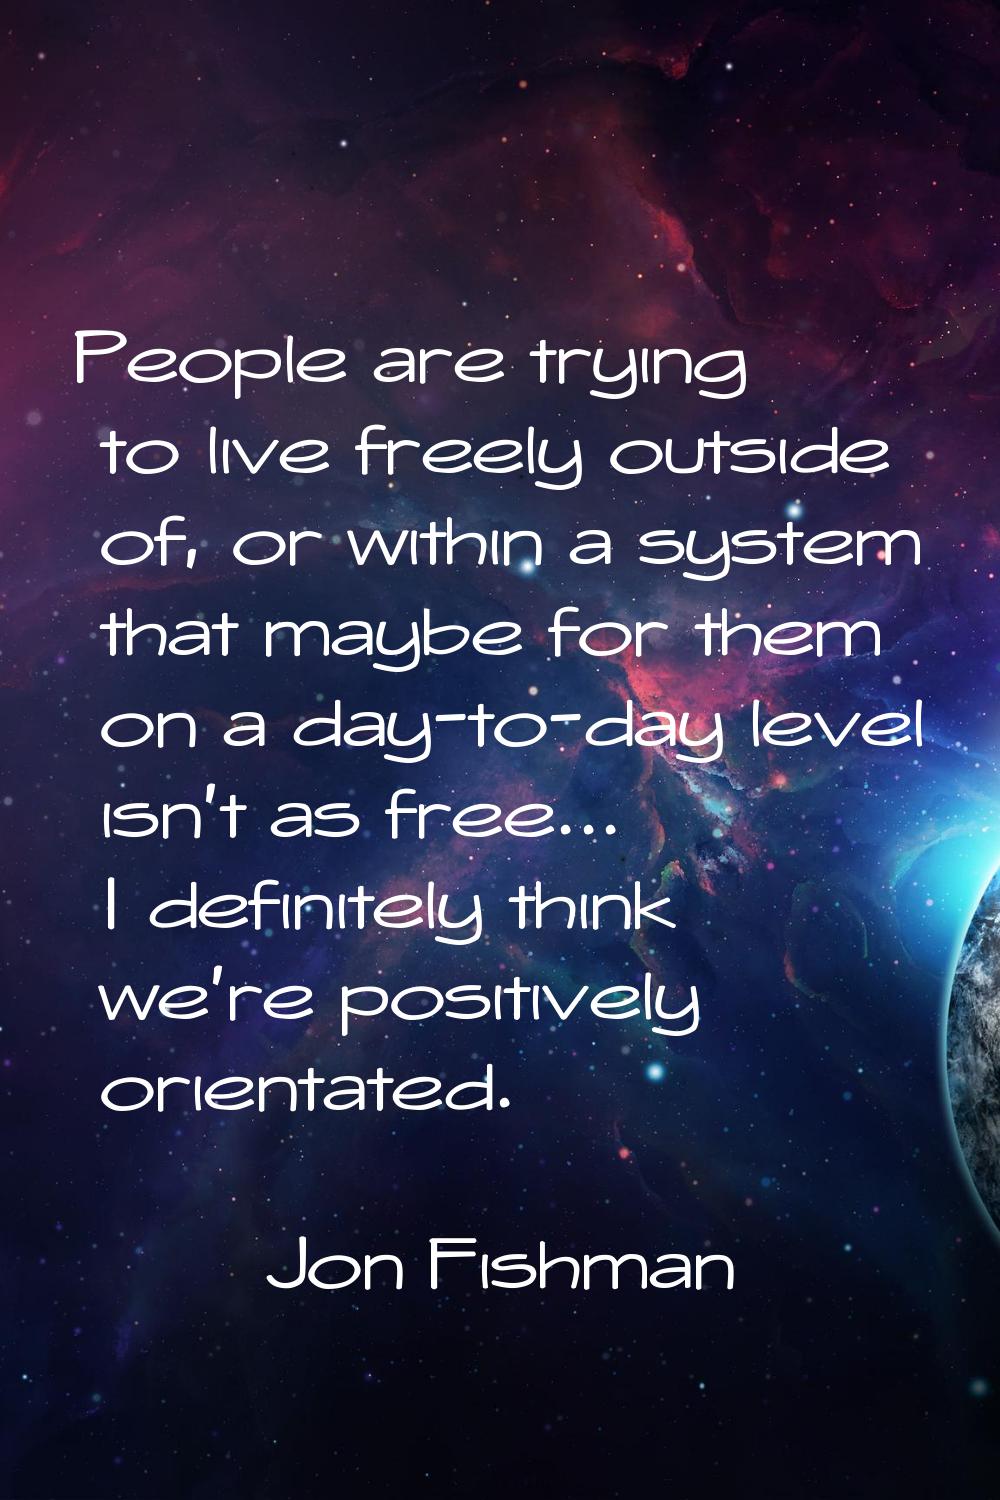 People are trying to live freely outside of, or within a system that maybe for them on a day-to-day